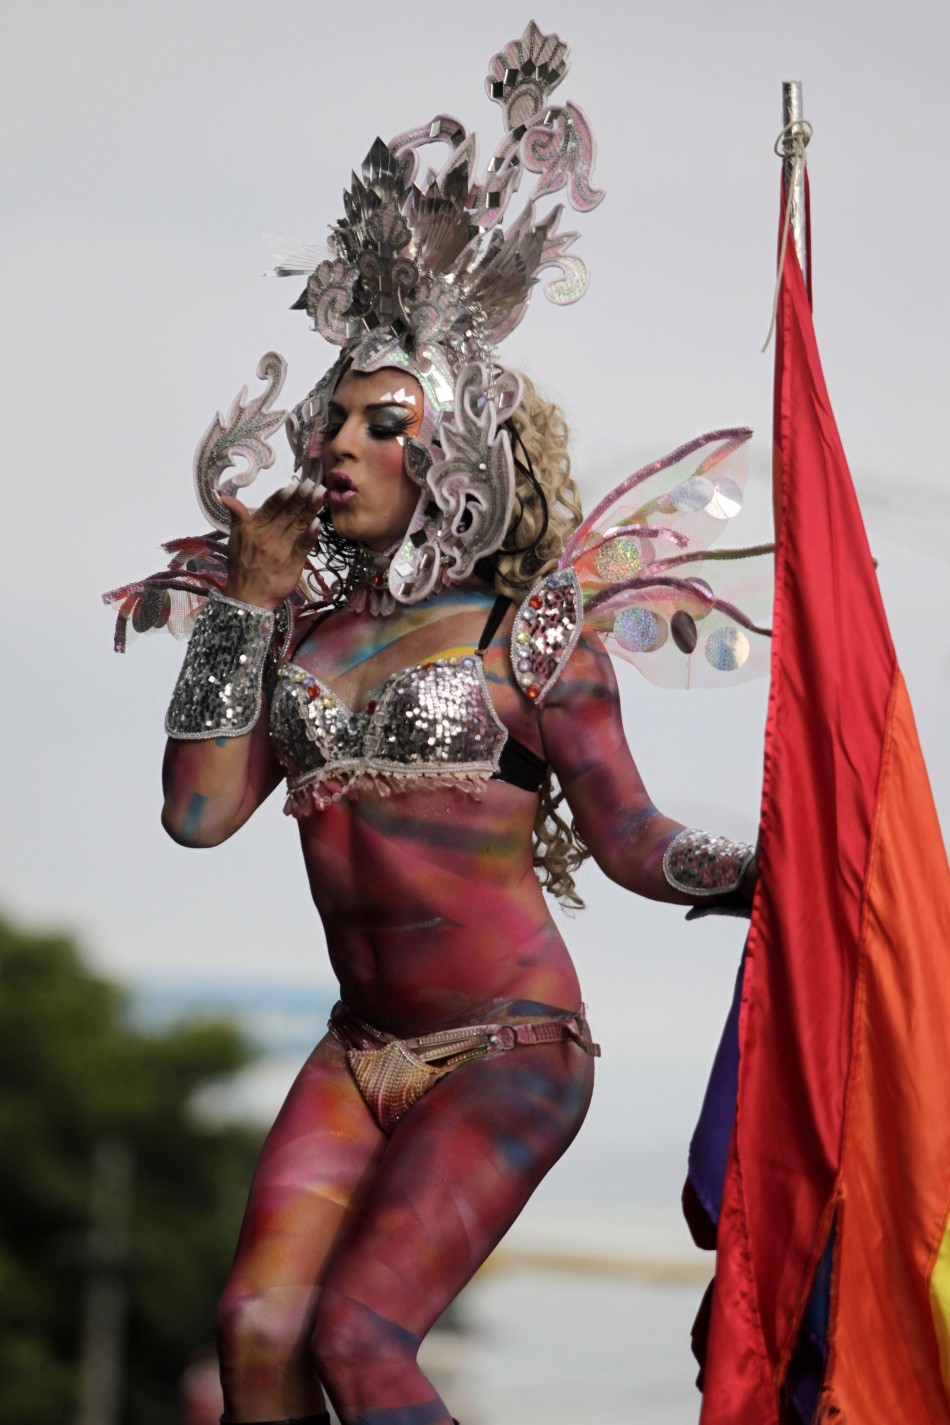 A member of the LGBT community takes part in a gay pride parade in Managua, capital of Nicaragua